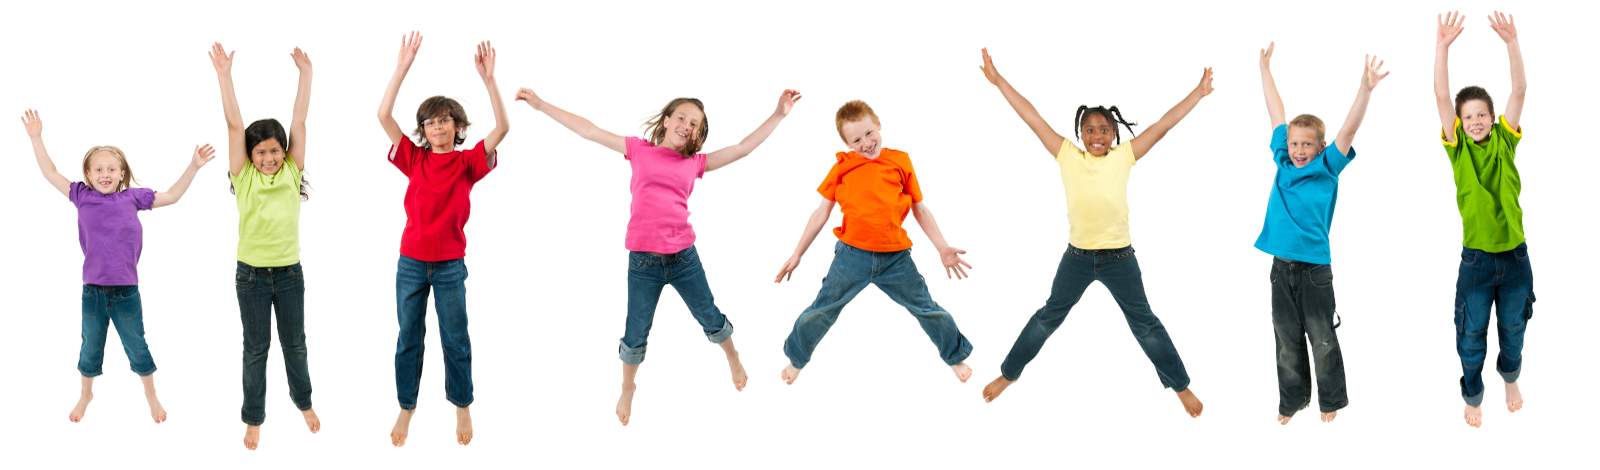 Group of children jumping up